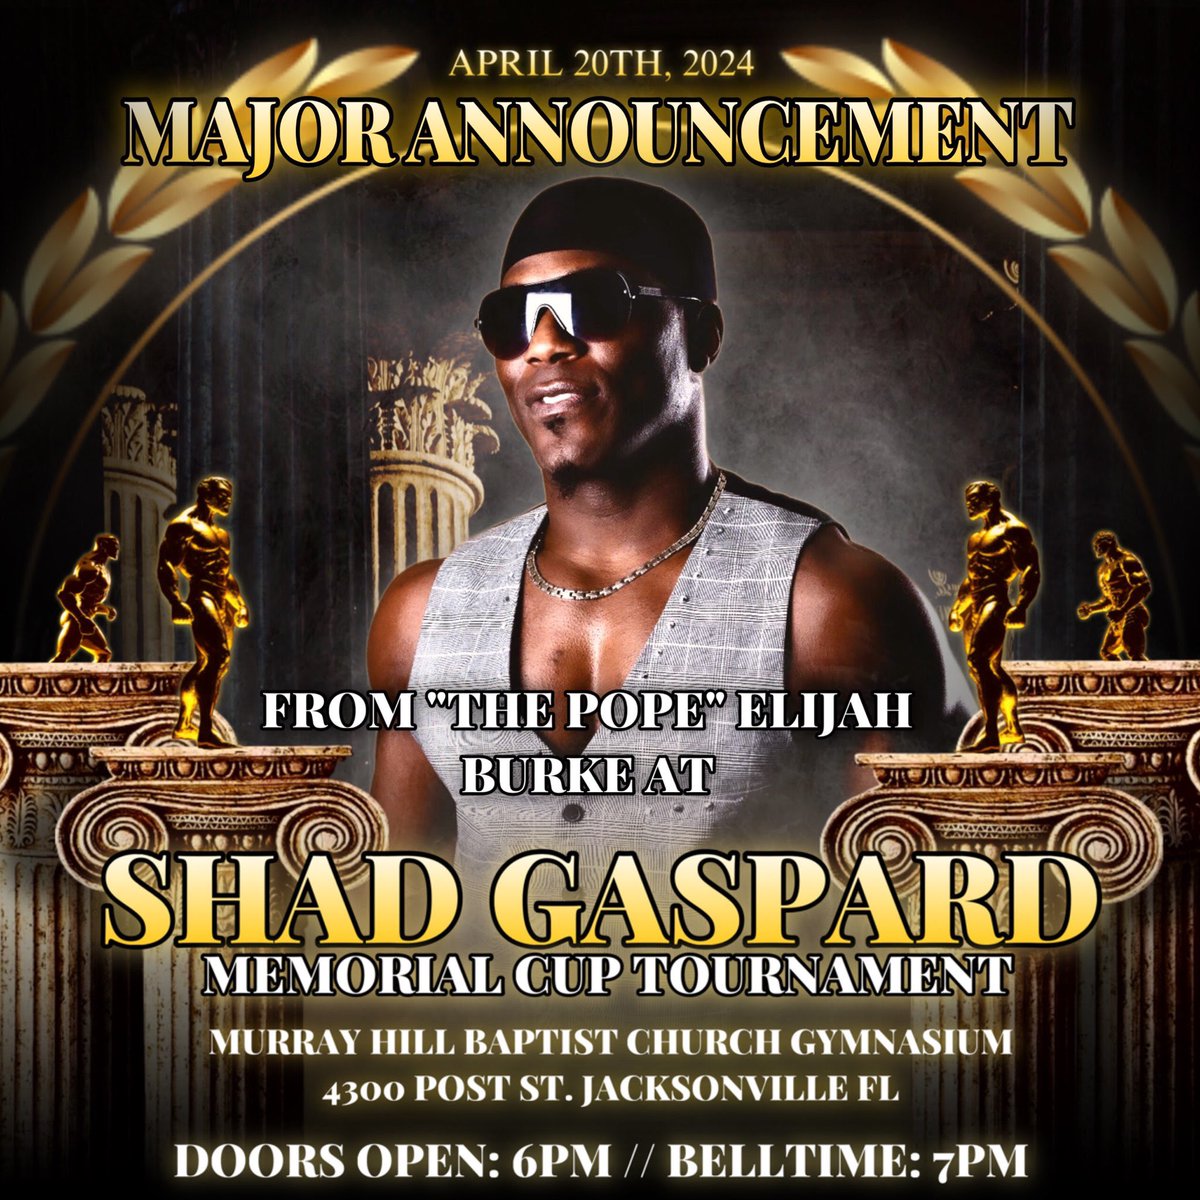 “The Pope” Elijah Burke will be making a MAJOR announcement at the Gaspard Memorial Cup Tournament. What could it be? 👀

#SGMC24 #ShadGaspard #MemorialCup #Beast #ShadGaspardMemorialCup #Tournament #Honor #Respect #Pride #Integrity #OVW #WWE #HOF #AEW #TNA #Duuuval #Jacksonville